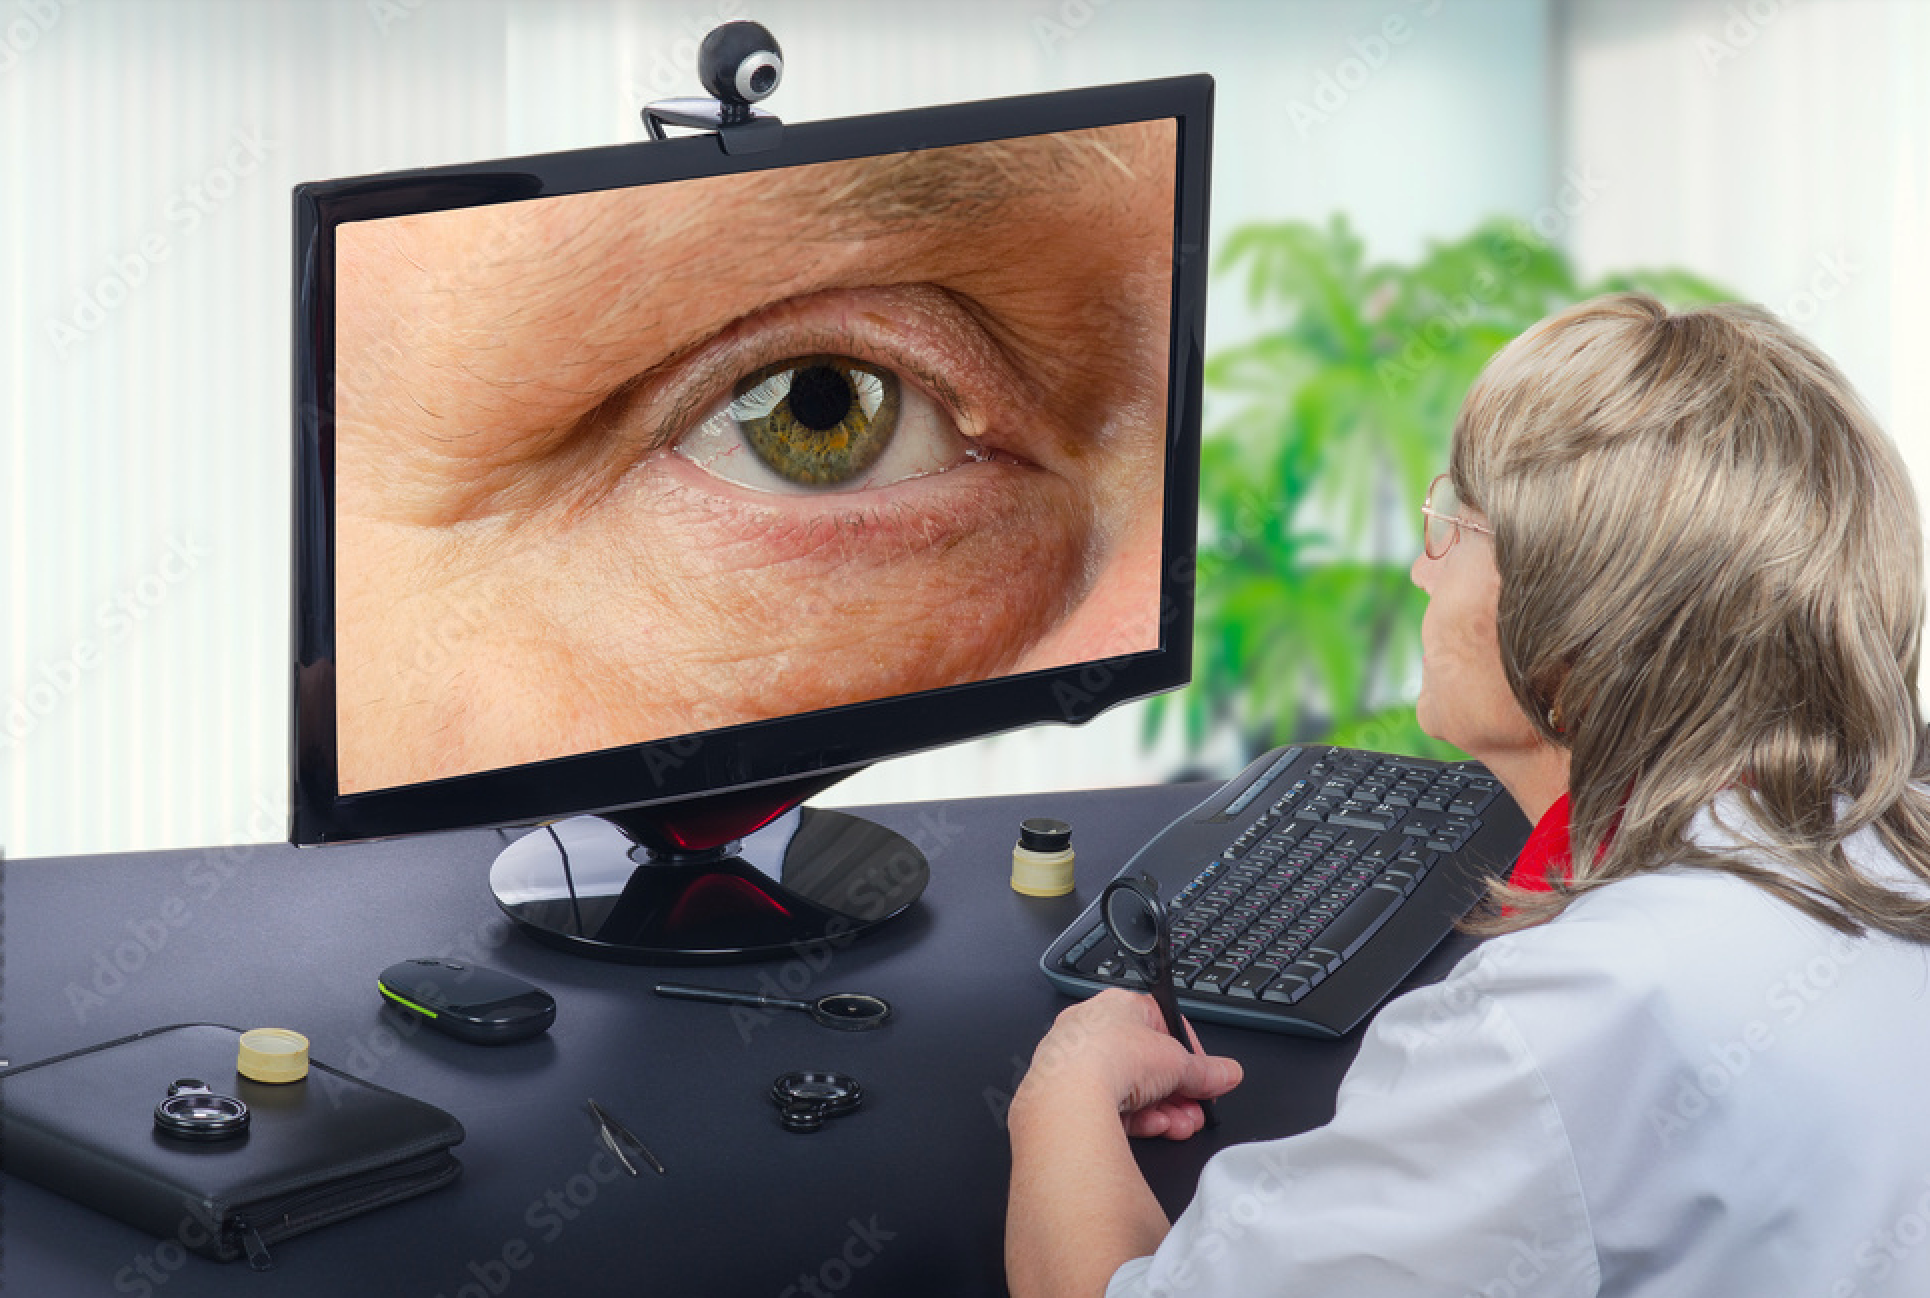 A study found that calling patients in advance can increase telehealth attendance. 